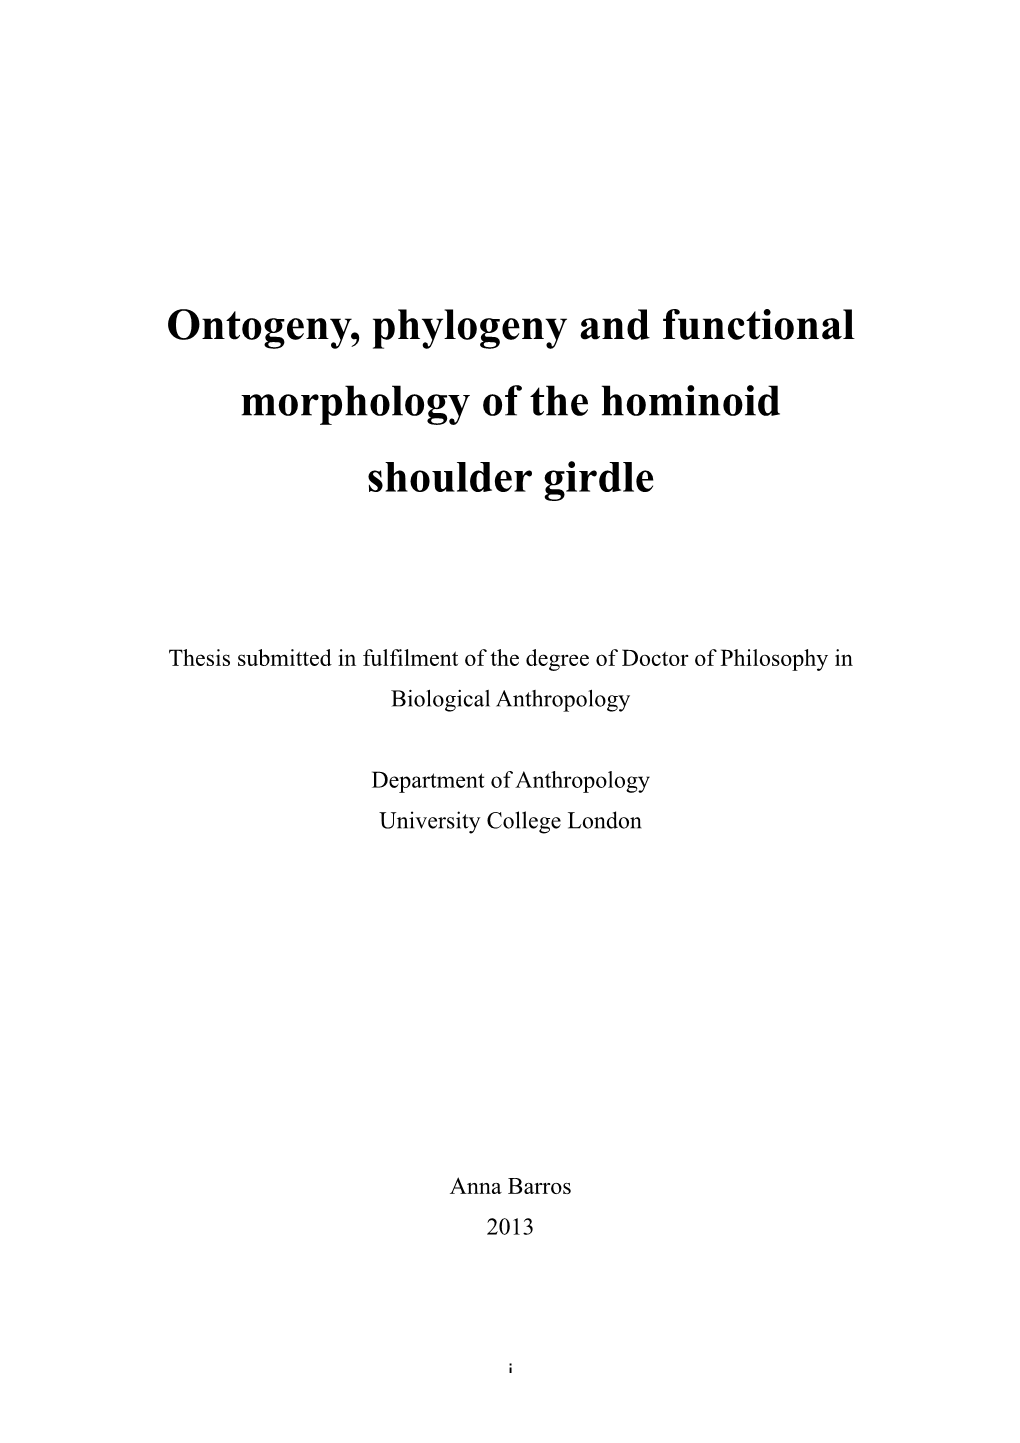 Ontogeny, Phylogeny and Functional Morphology of the Hominoid